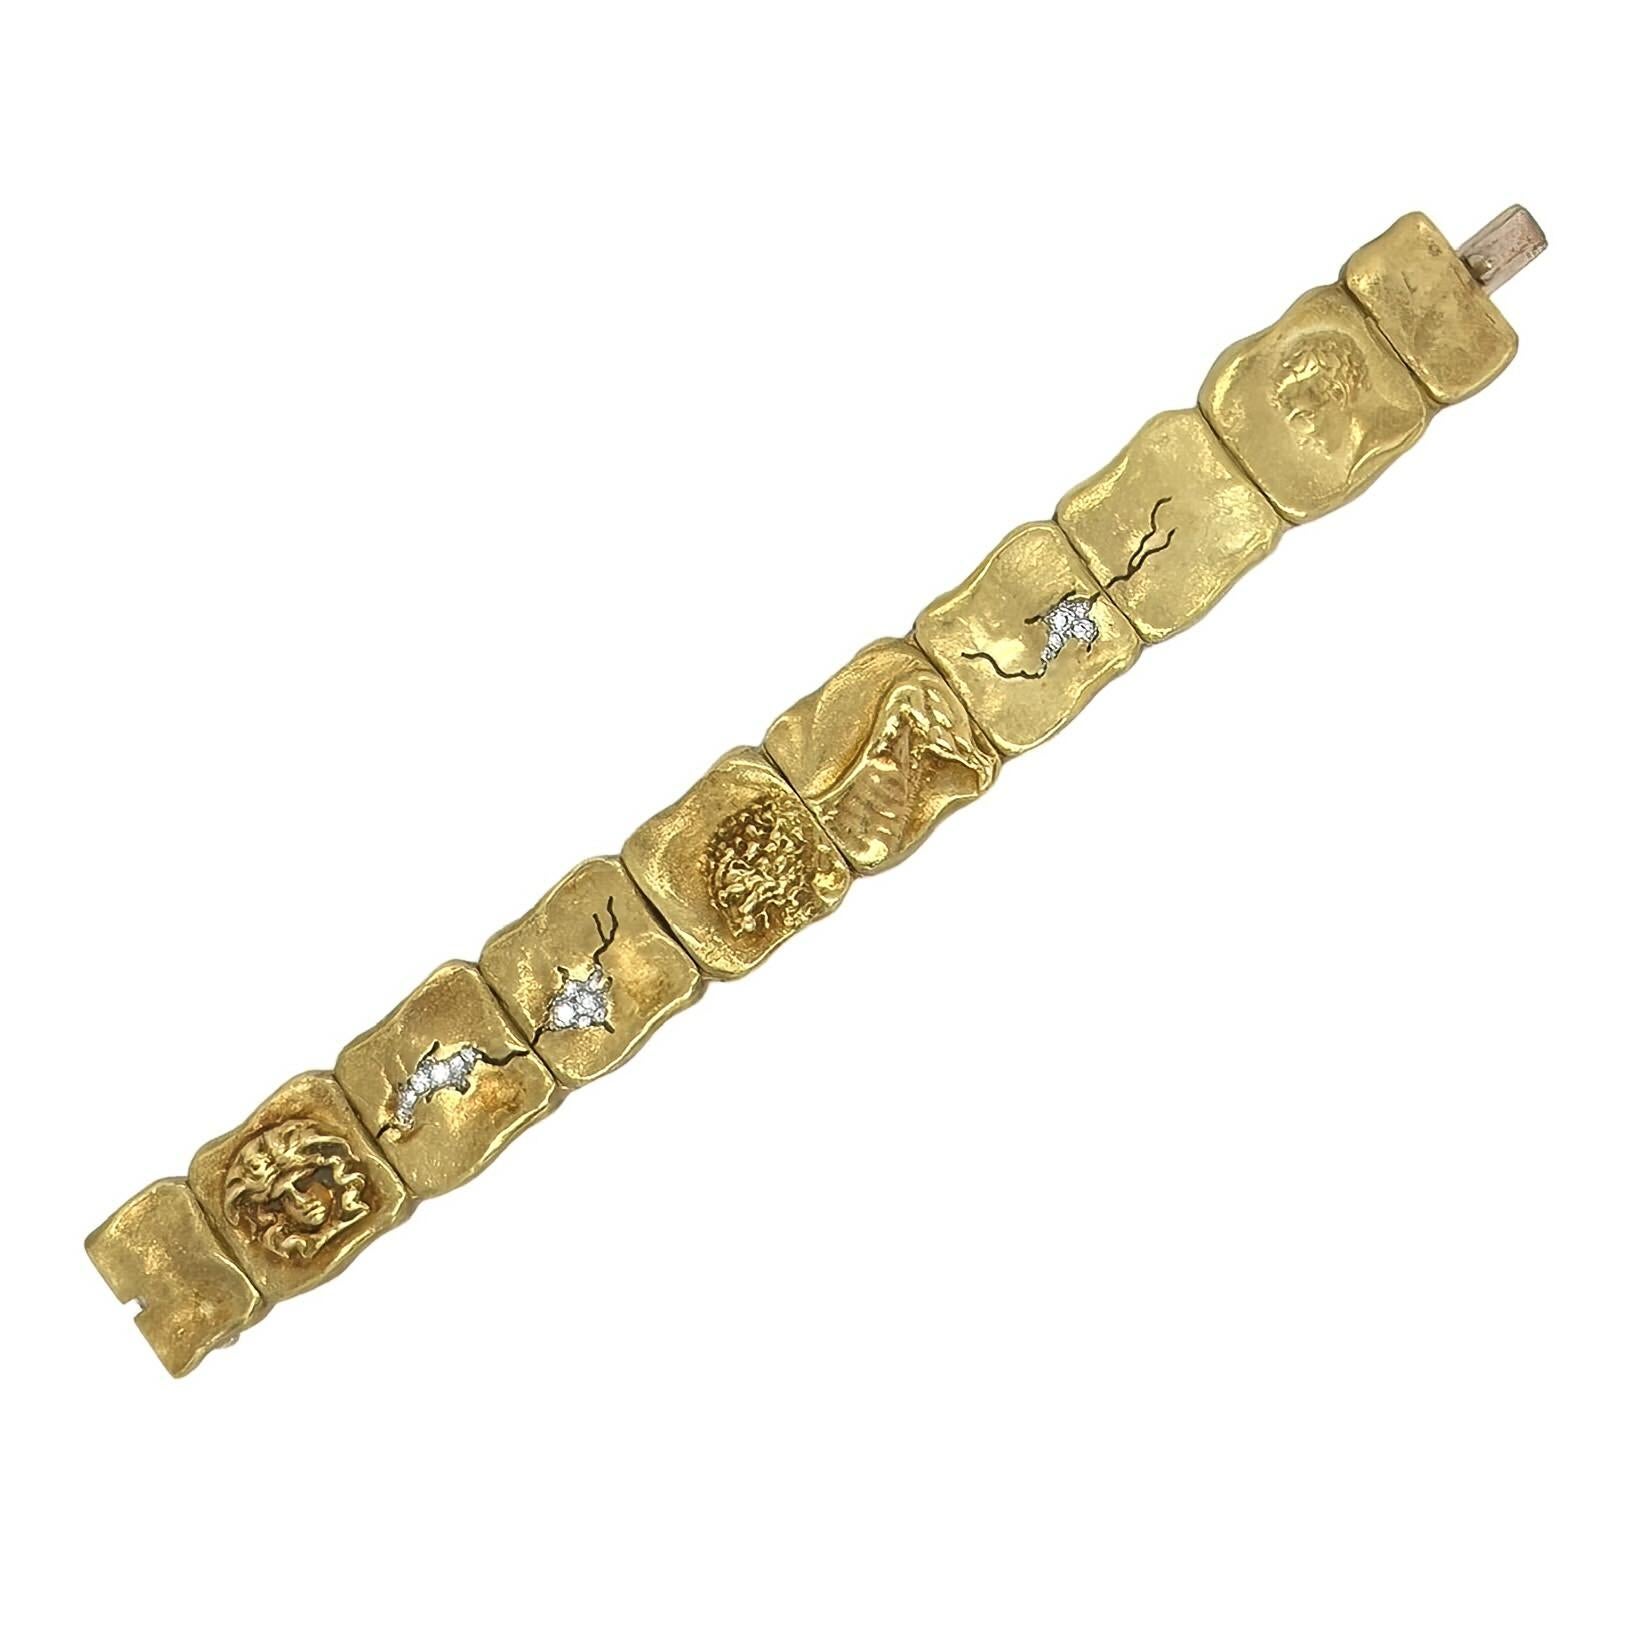 An 18 karat yellow gold and diamond bracelet, SeidenGang.  The “Odyssey” bracelet designed as nine gold hinged rustic squares depicting a Medusa head, the Nemean lion and the head of a man in profile, enhanced with 17 platinum set round brilliant